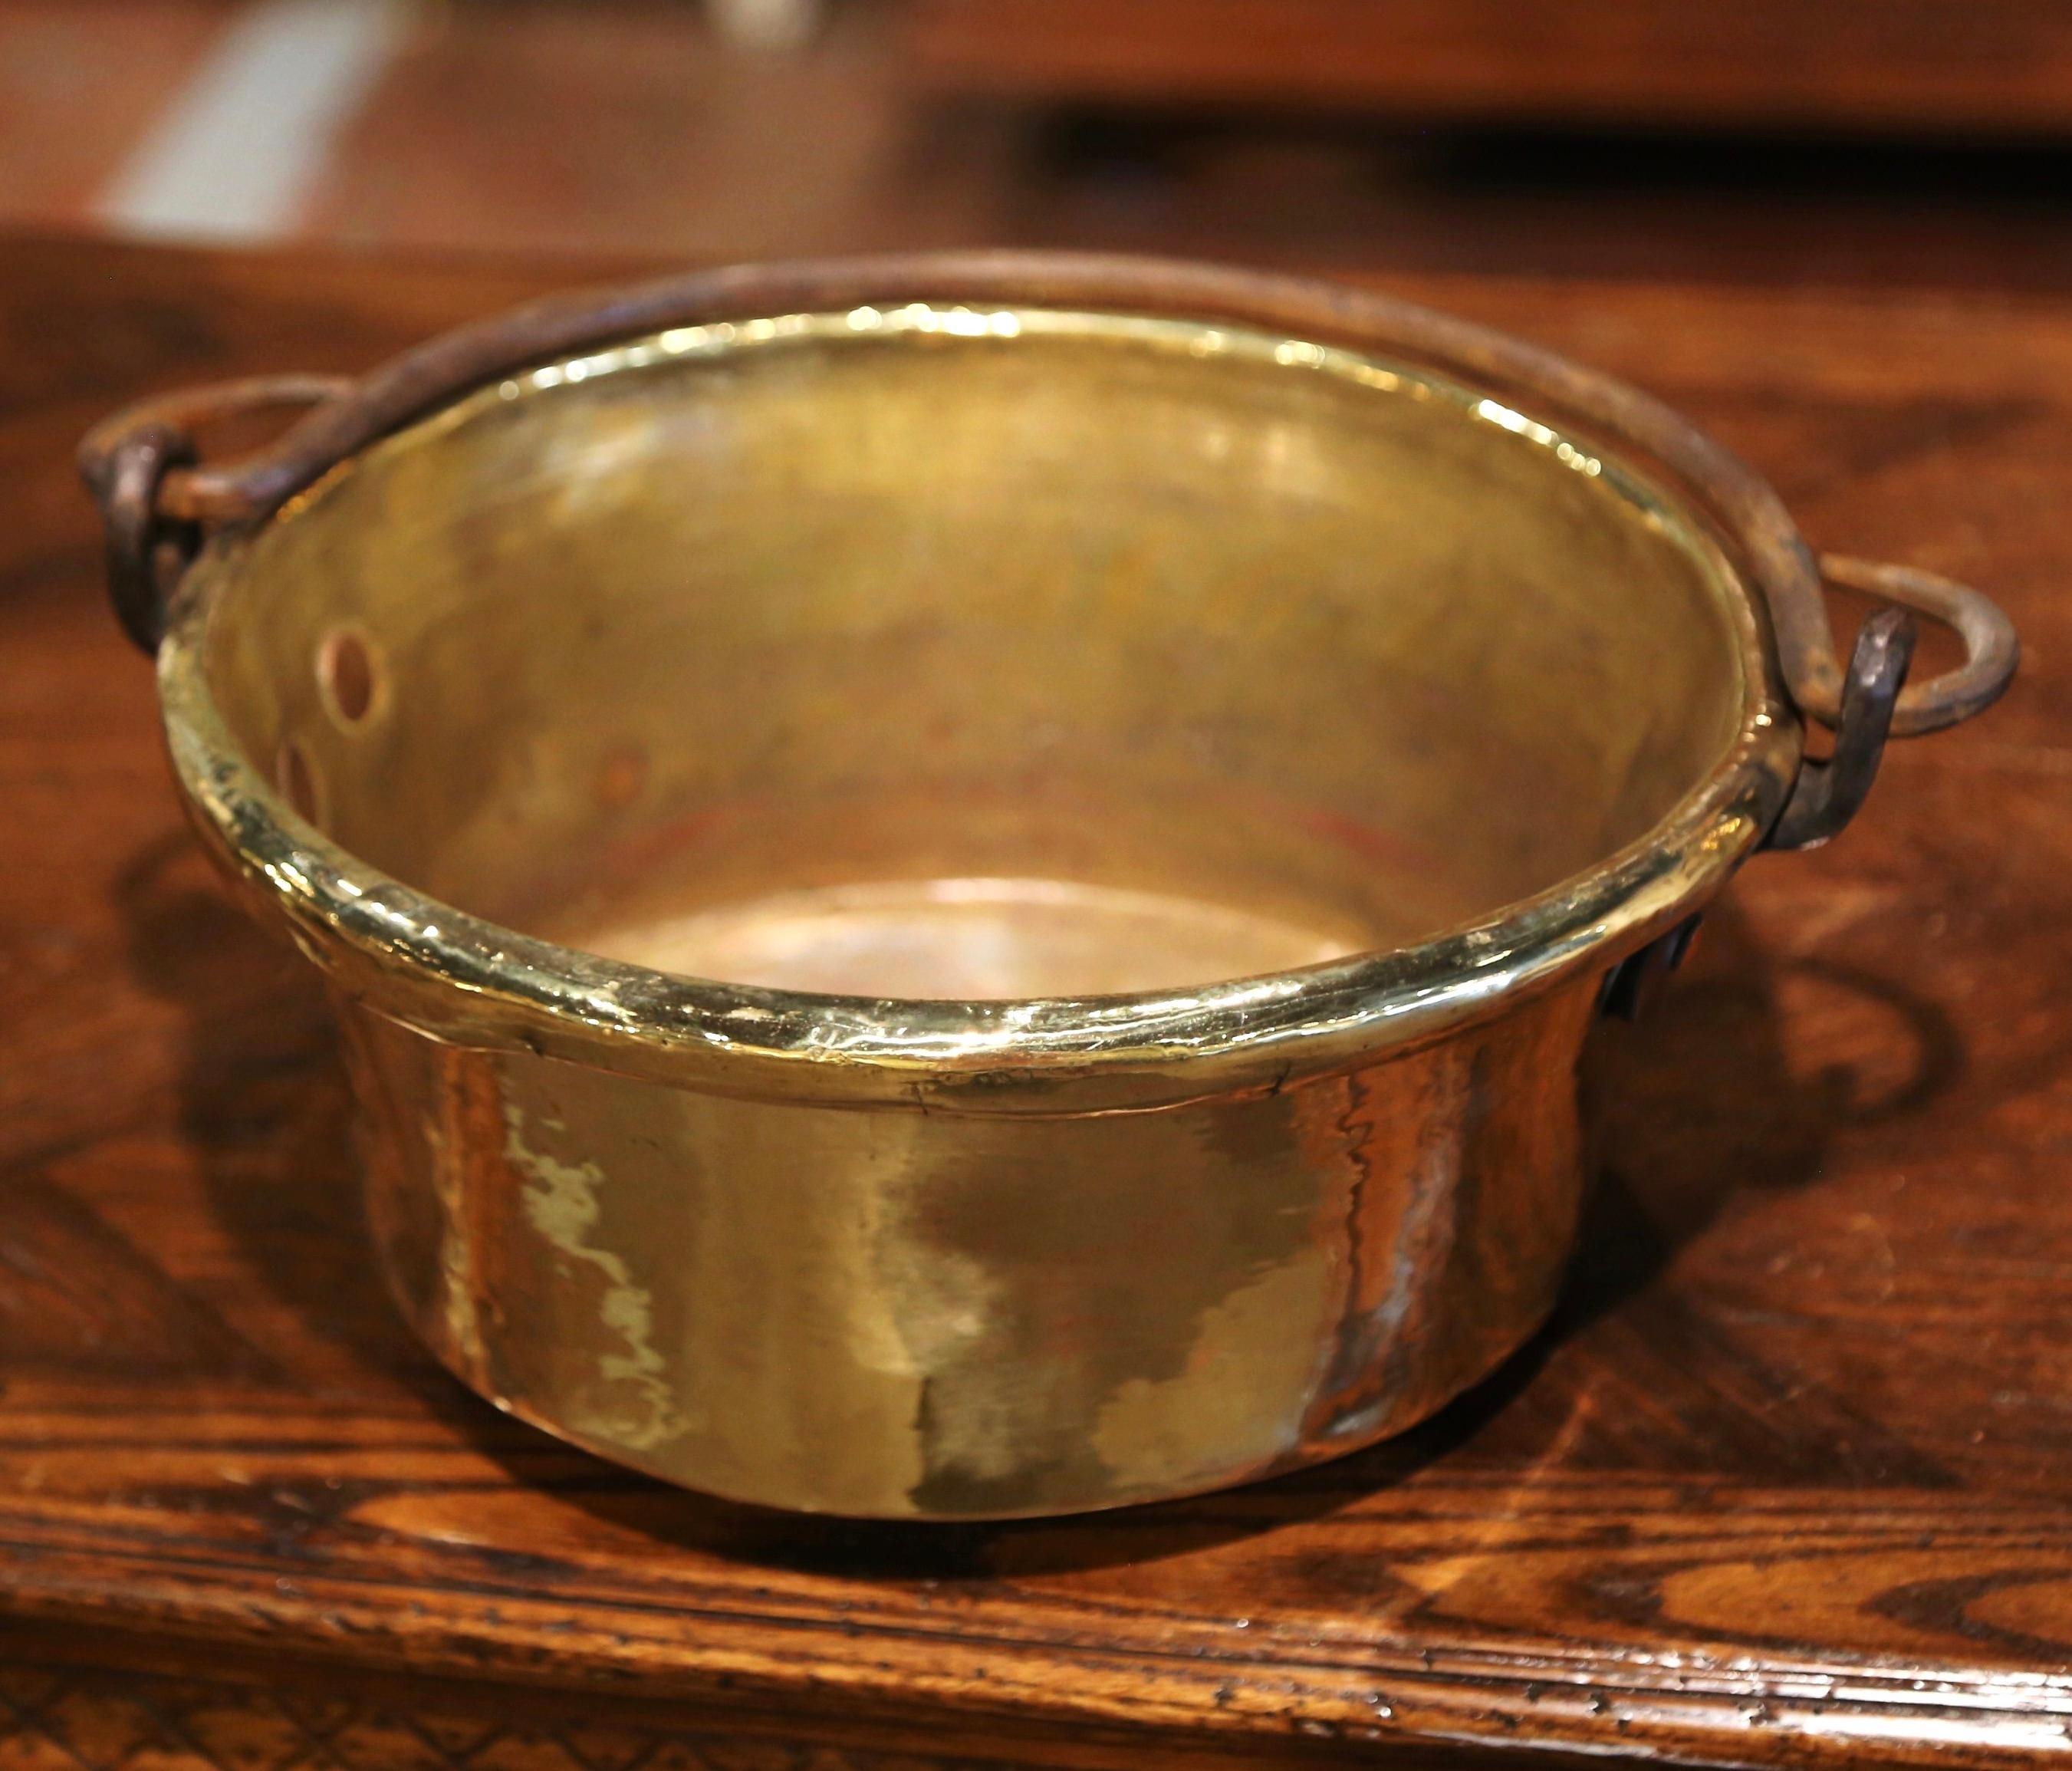 Bring an authentic French countryside touch to your kitchen with this antique copper marmalade bowl. Crafted in Normandy, France, circa 1870, the decorative “Bassine a Confiture” (jelly bowl) is round in shape and dressed with a forged center handle